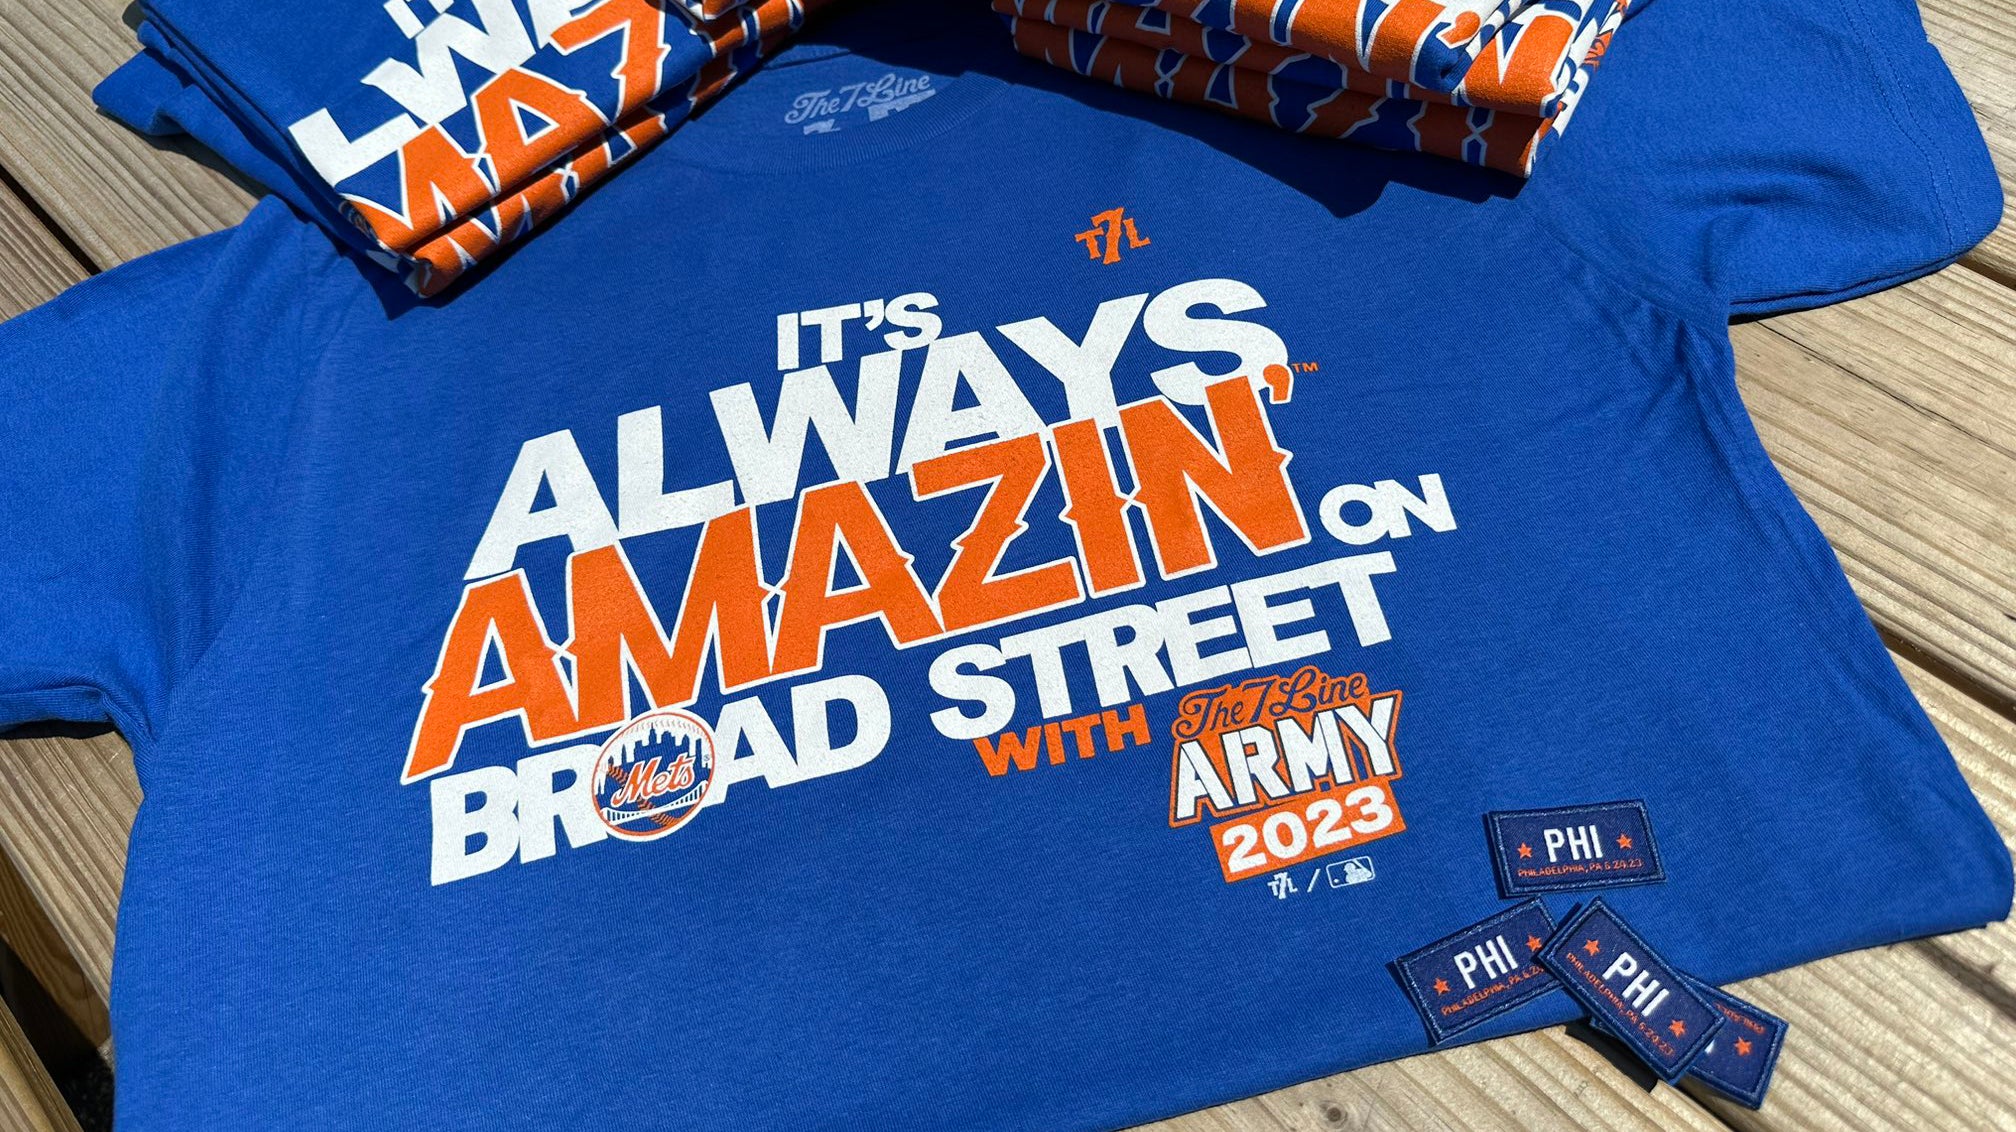 Citizens Bank Park with The 7 Line Army 2023